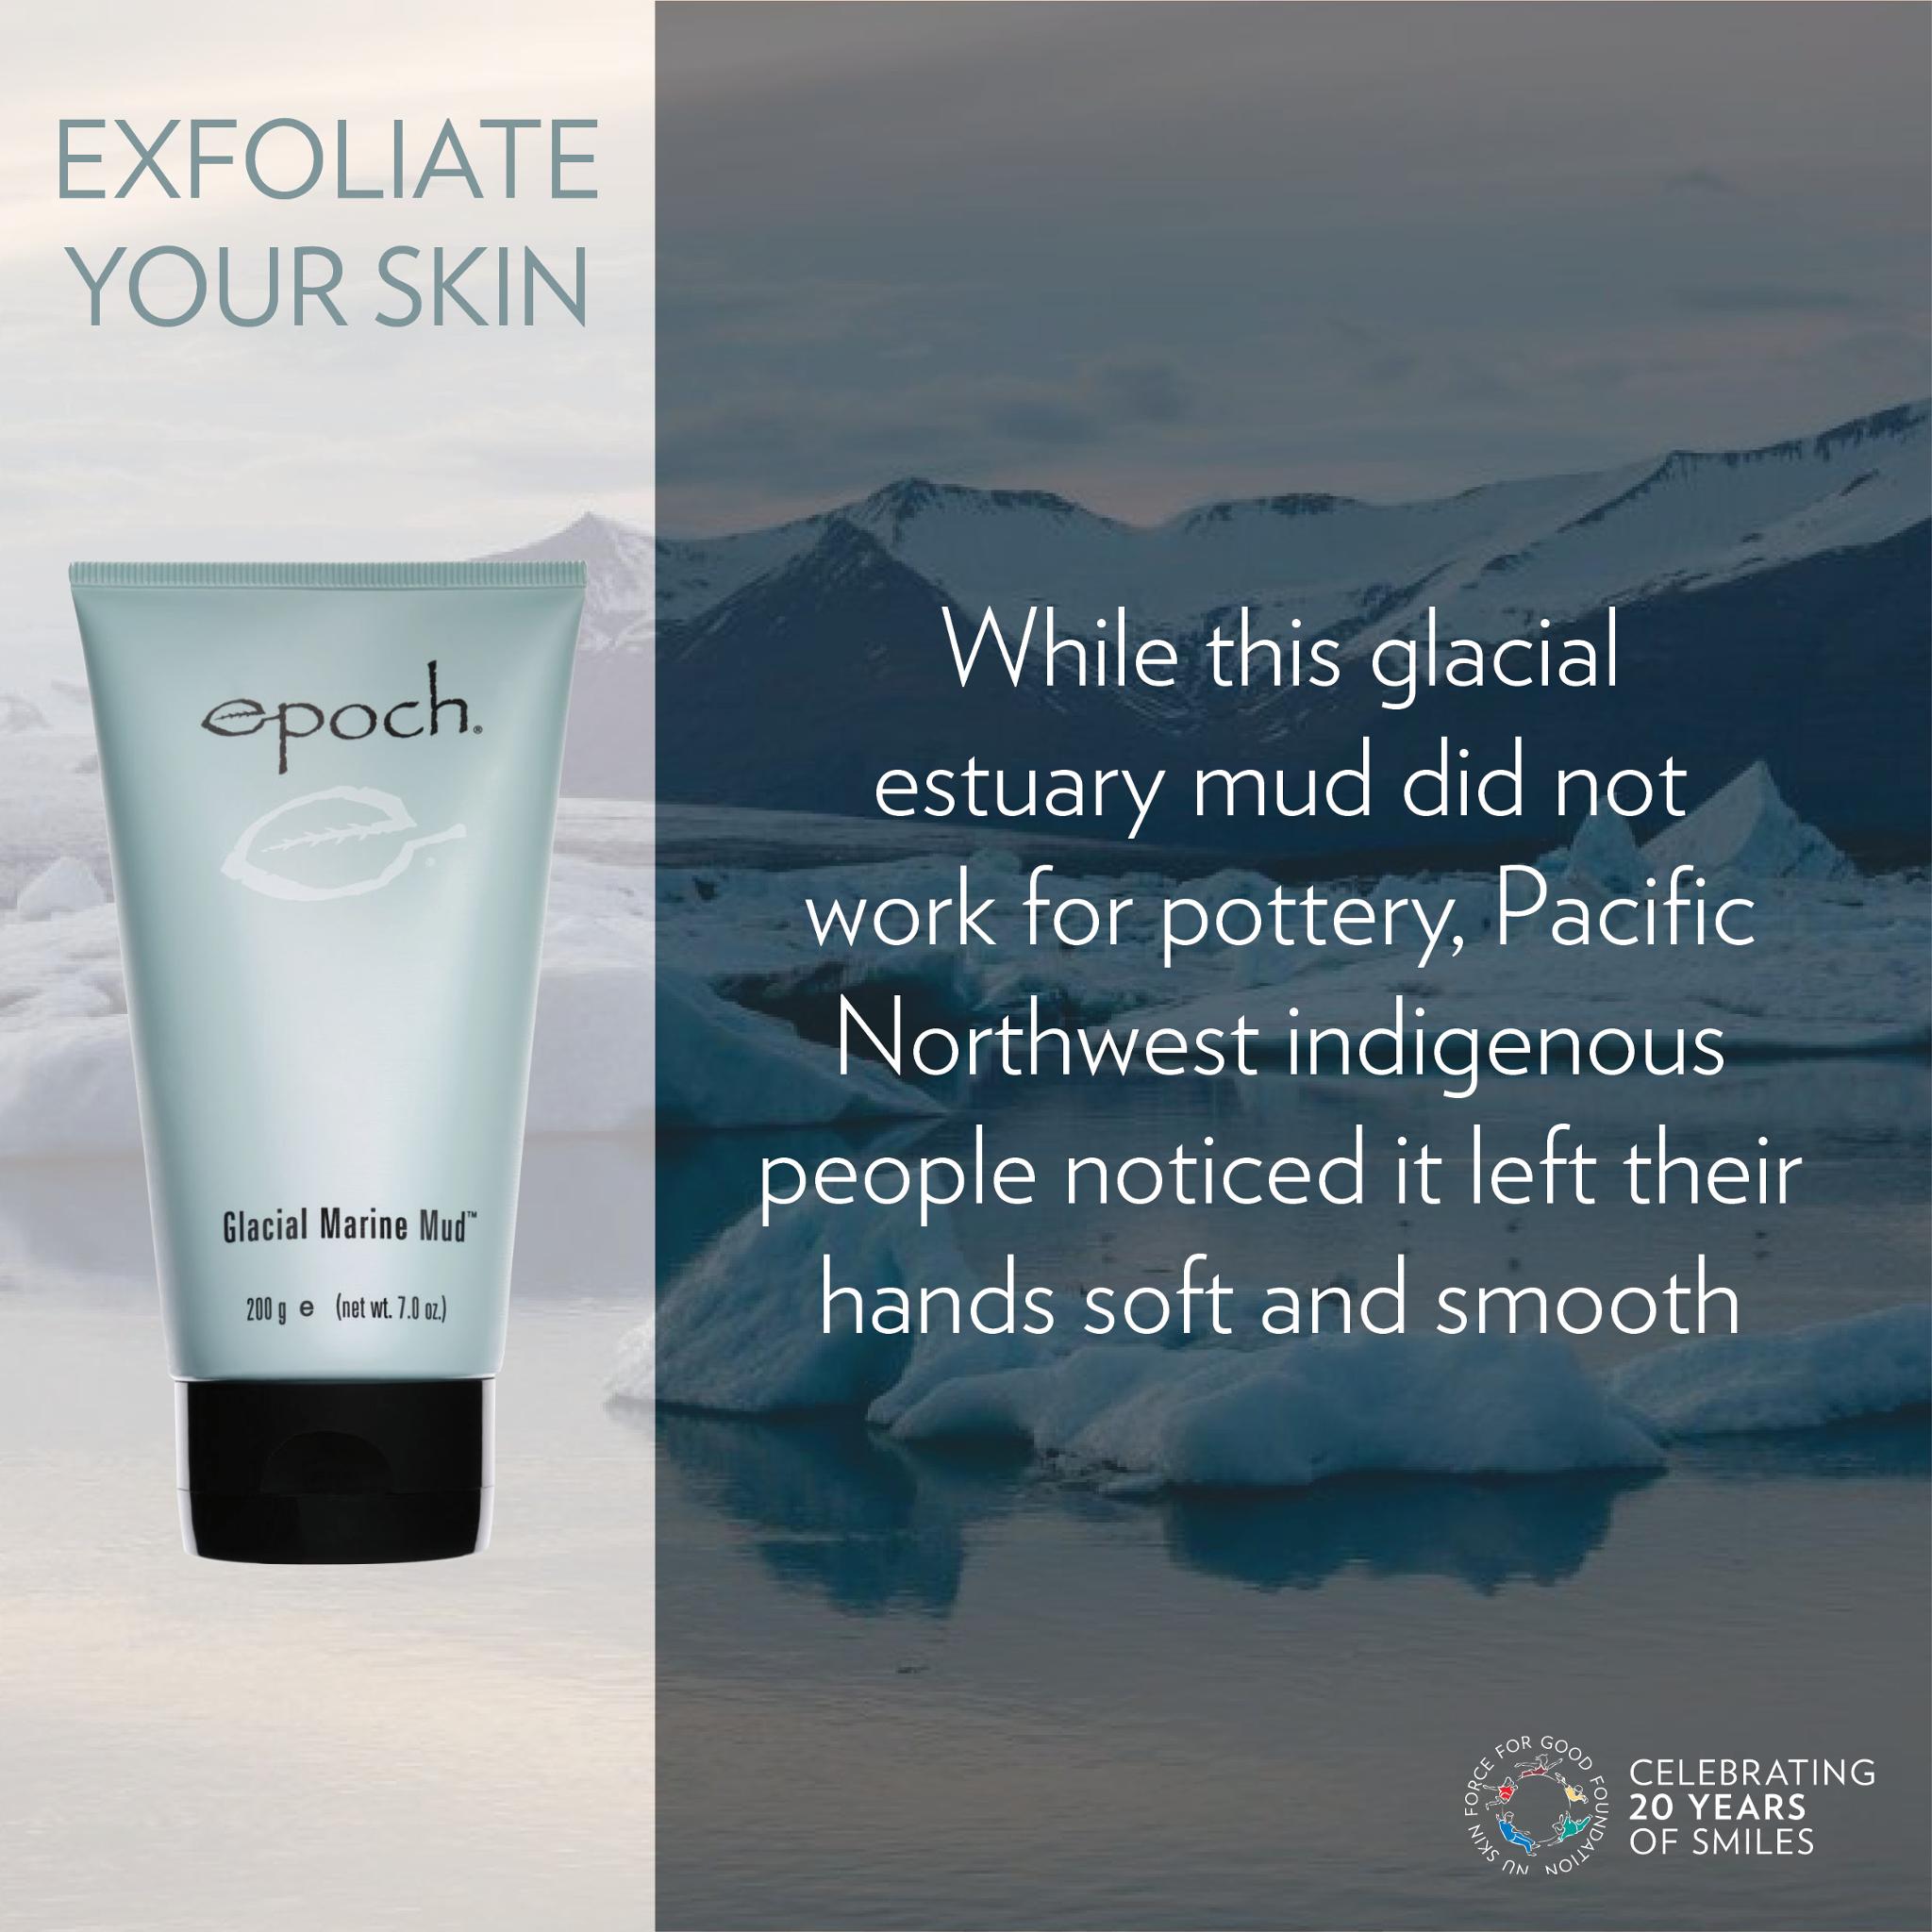 dragt Overskyet majs Nu Skin on Twitter: "Exfoliate and rejuvenate your skin with Glacial Marine  Mud. https://t.co/bSC8Q6LHiD #NuSkin https://t.co/Vu5HO7tYQu" / Twitter